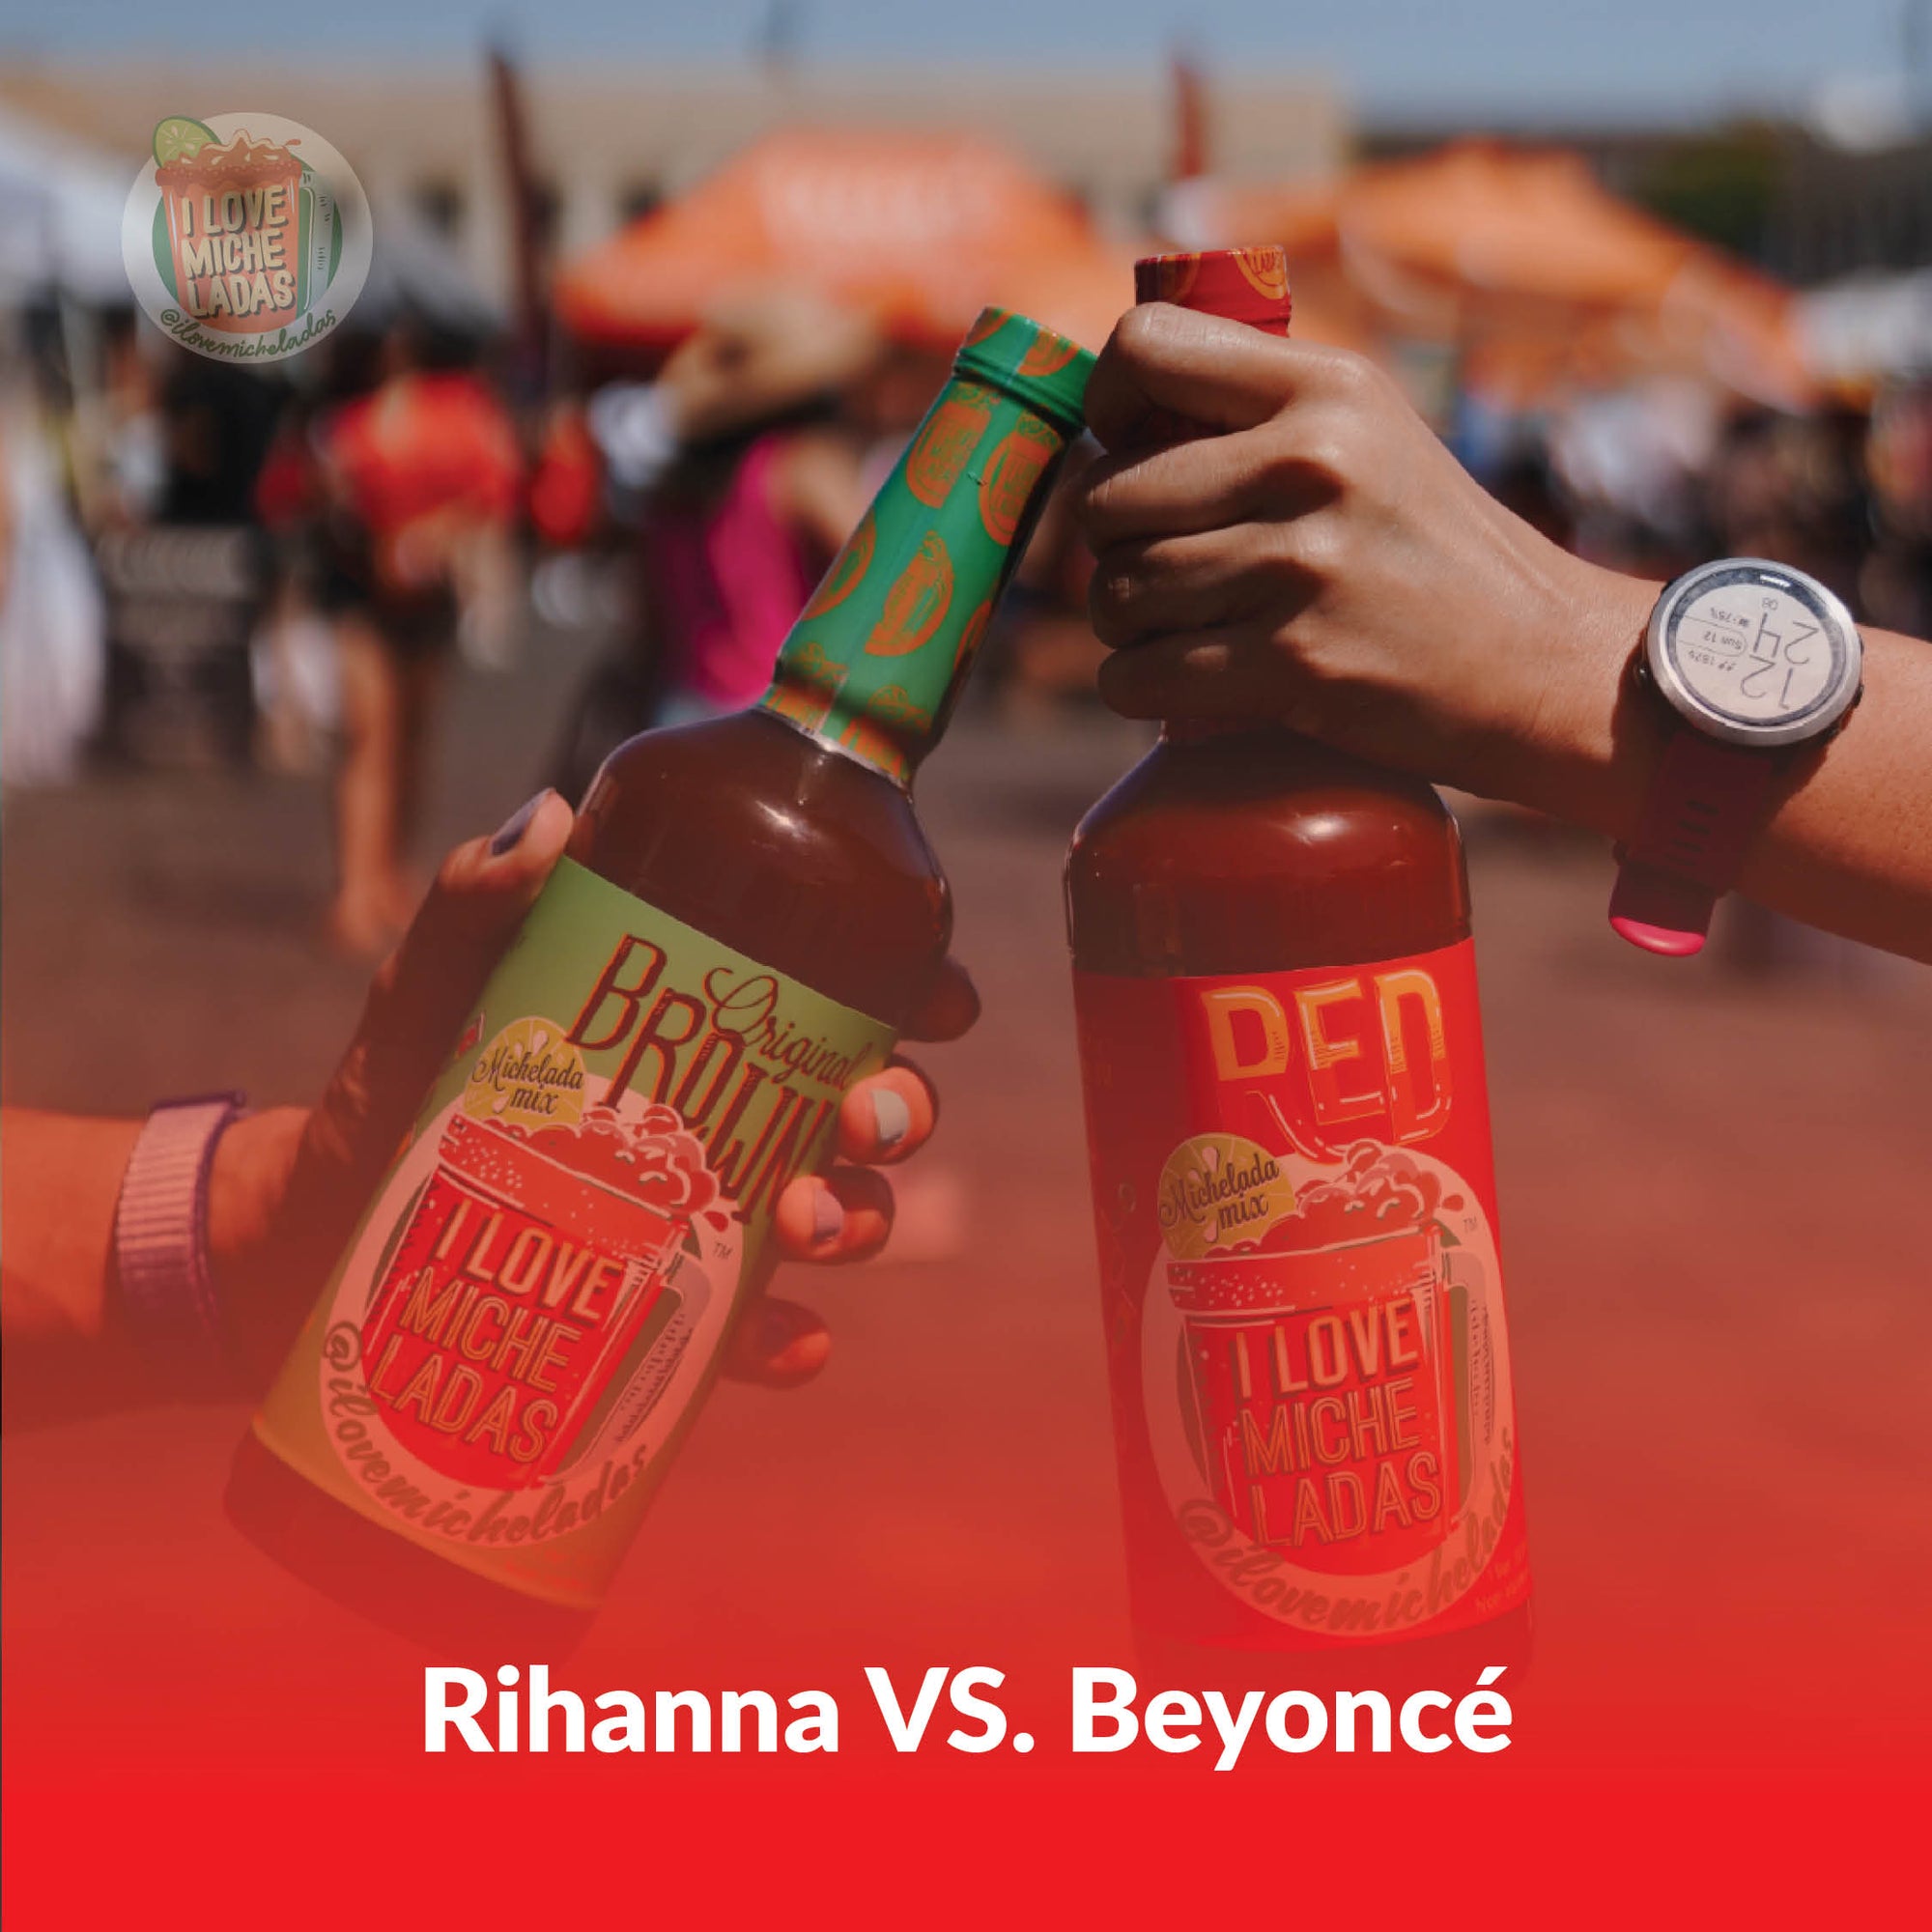 MICHE MIX OF THE WEEK: THE ONE WITH THE RIHANNA VS BEYONCÉ SING-OFF